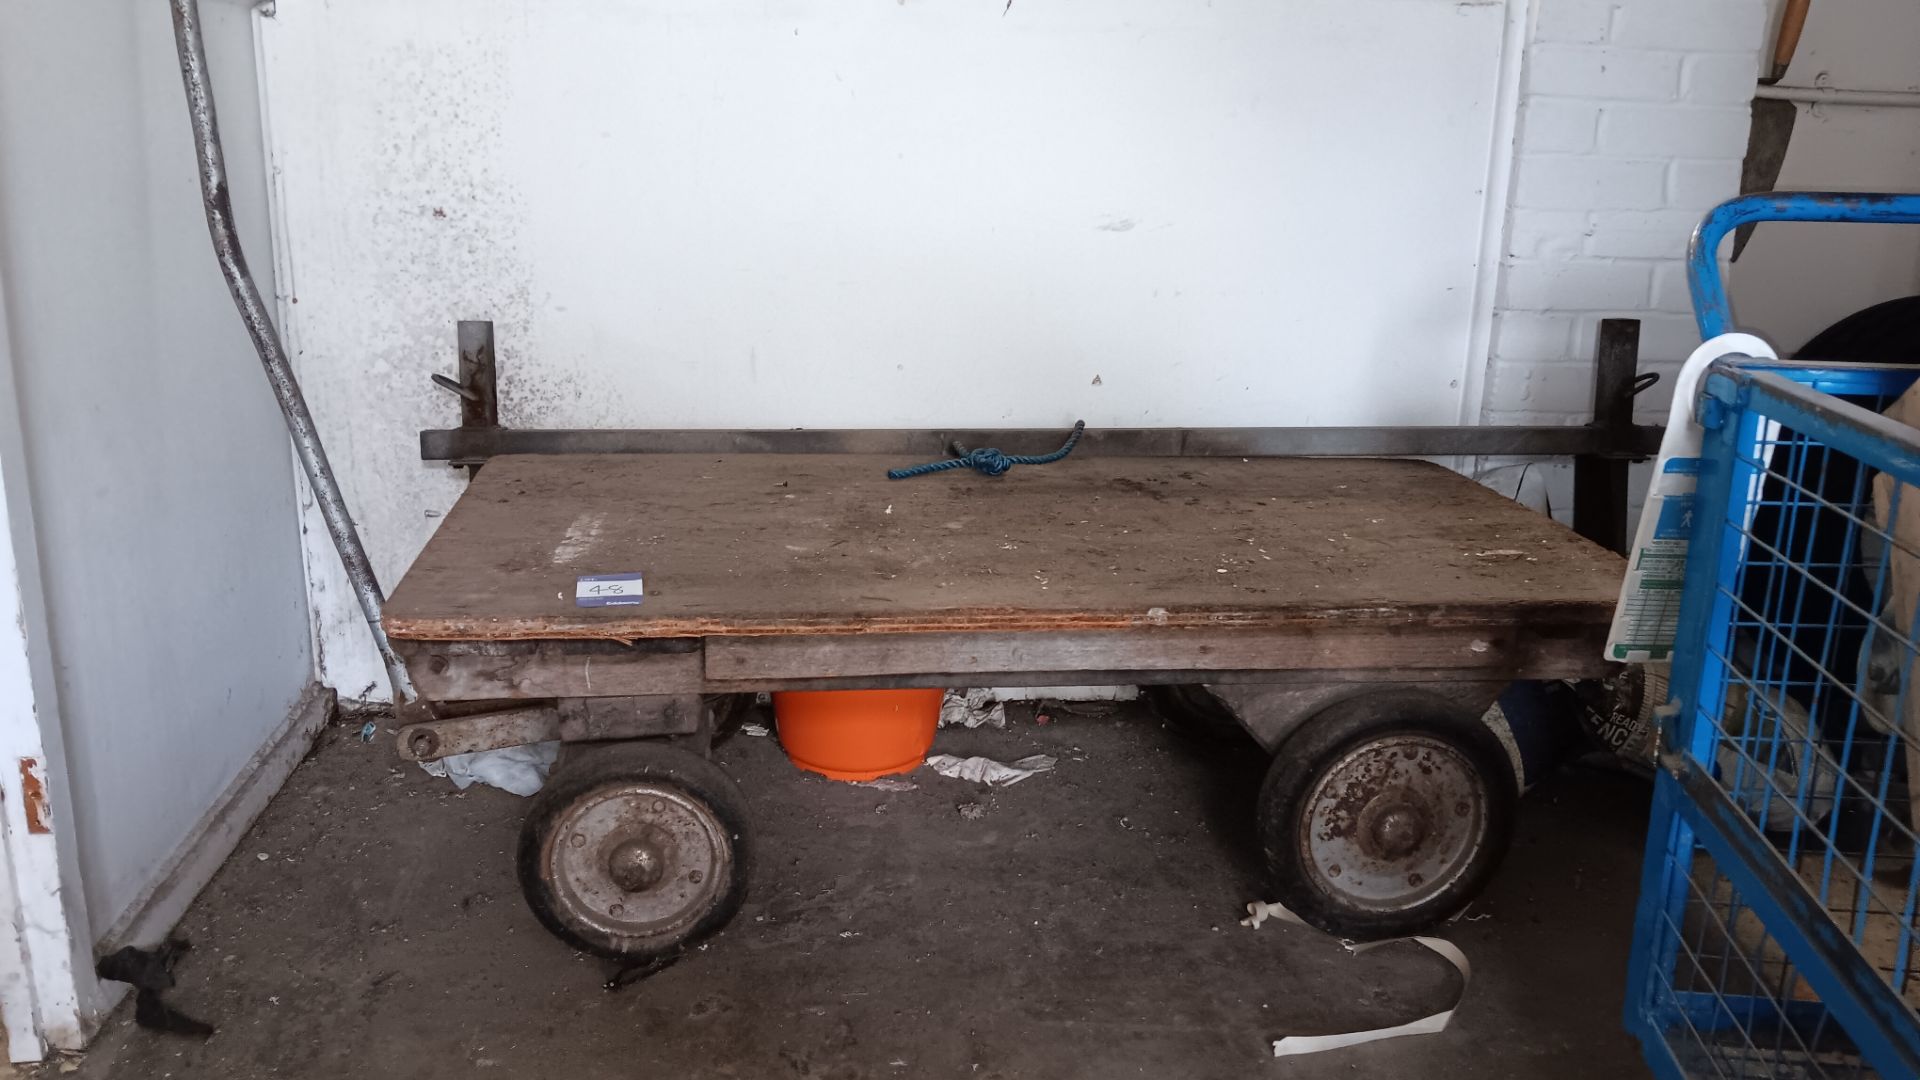 Workhorse pull along truck with wooden bed – Located in Unit 3 - Image 2 of 2